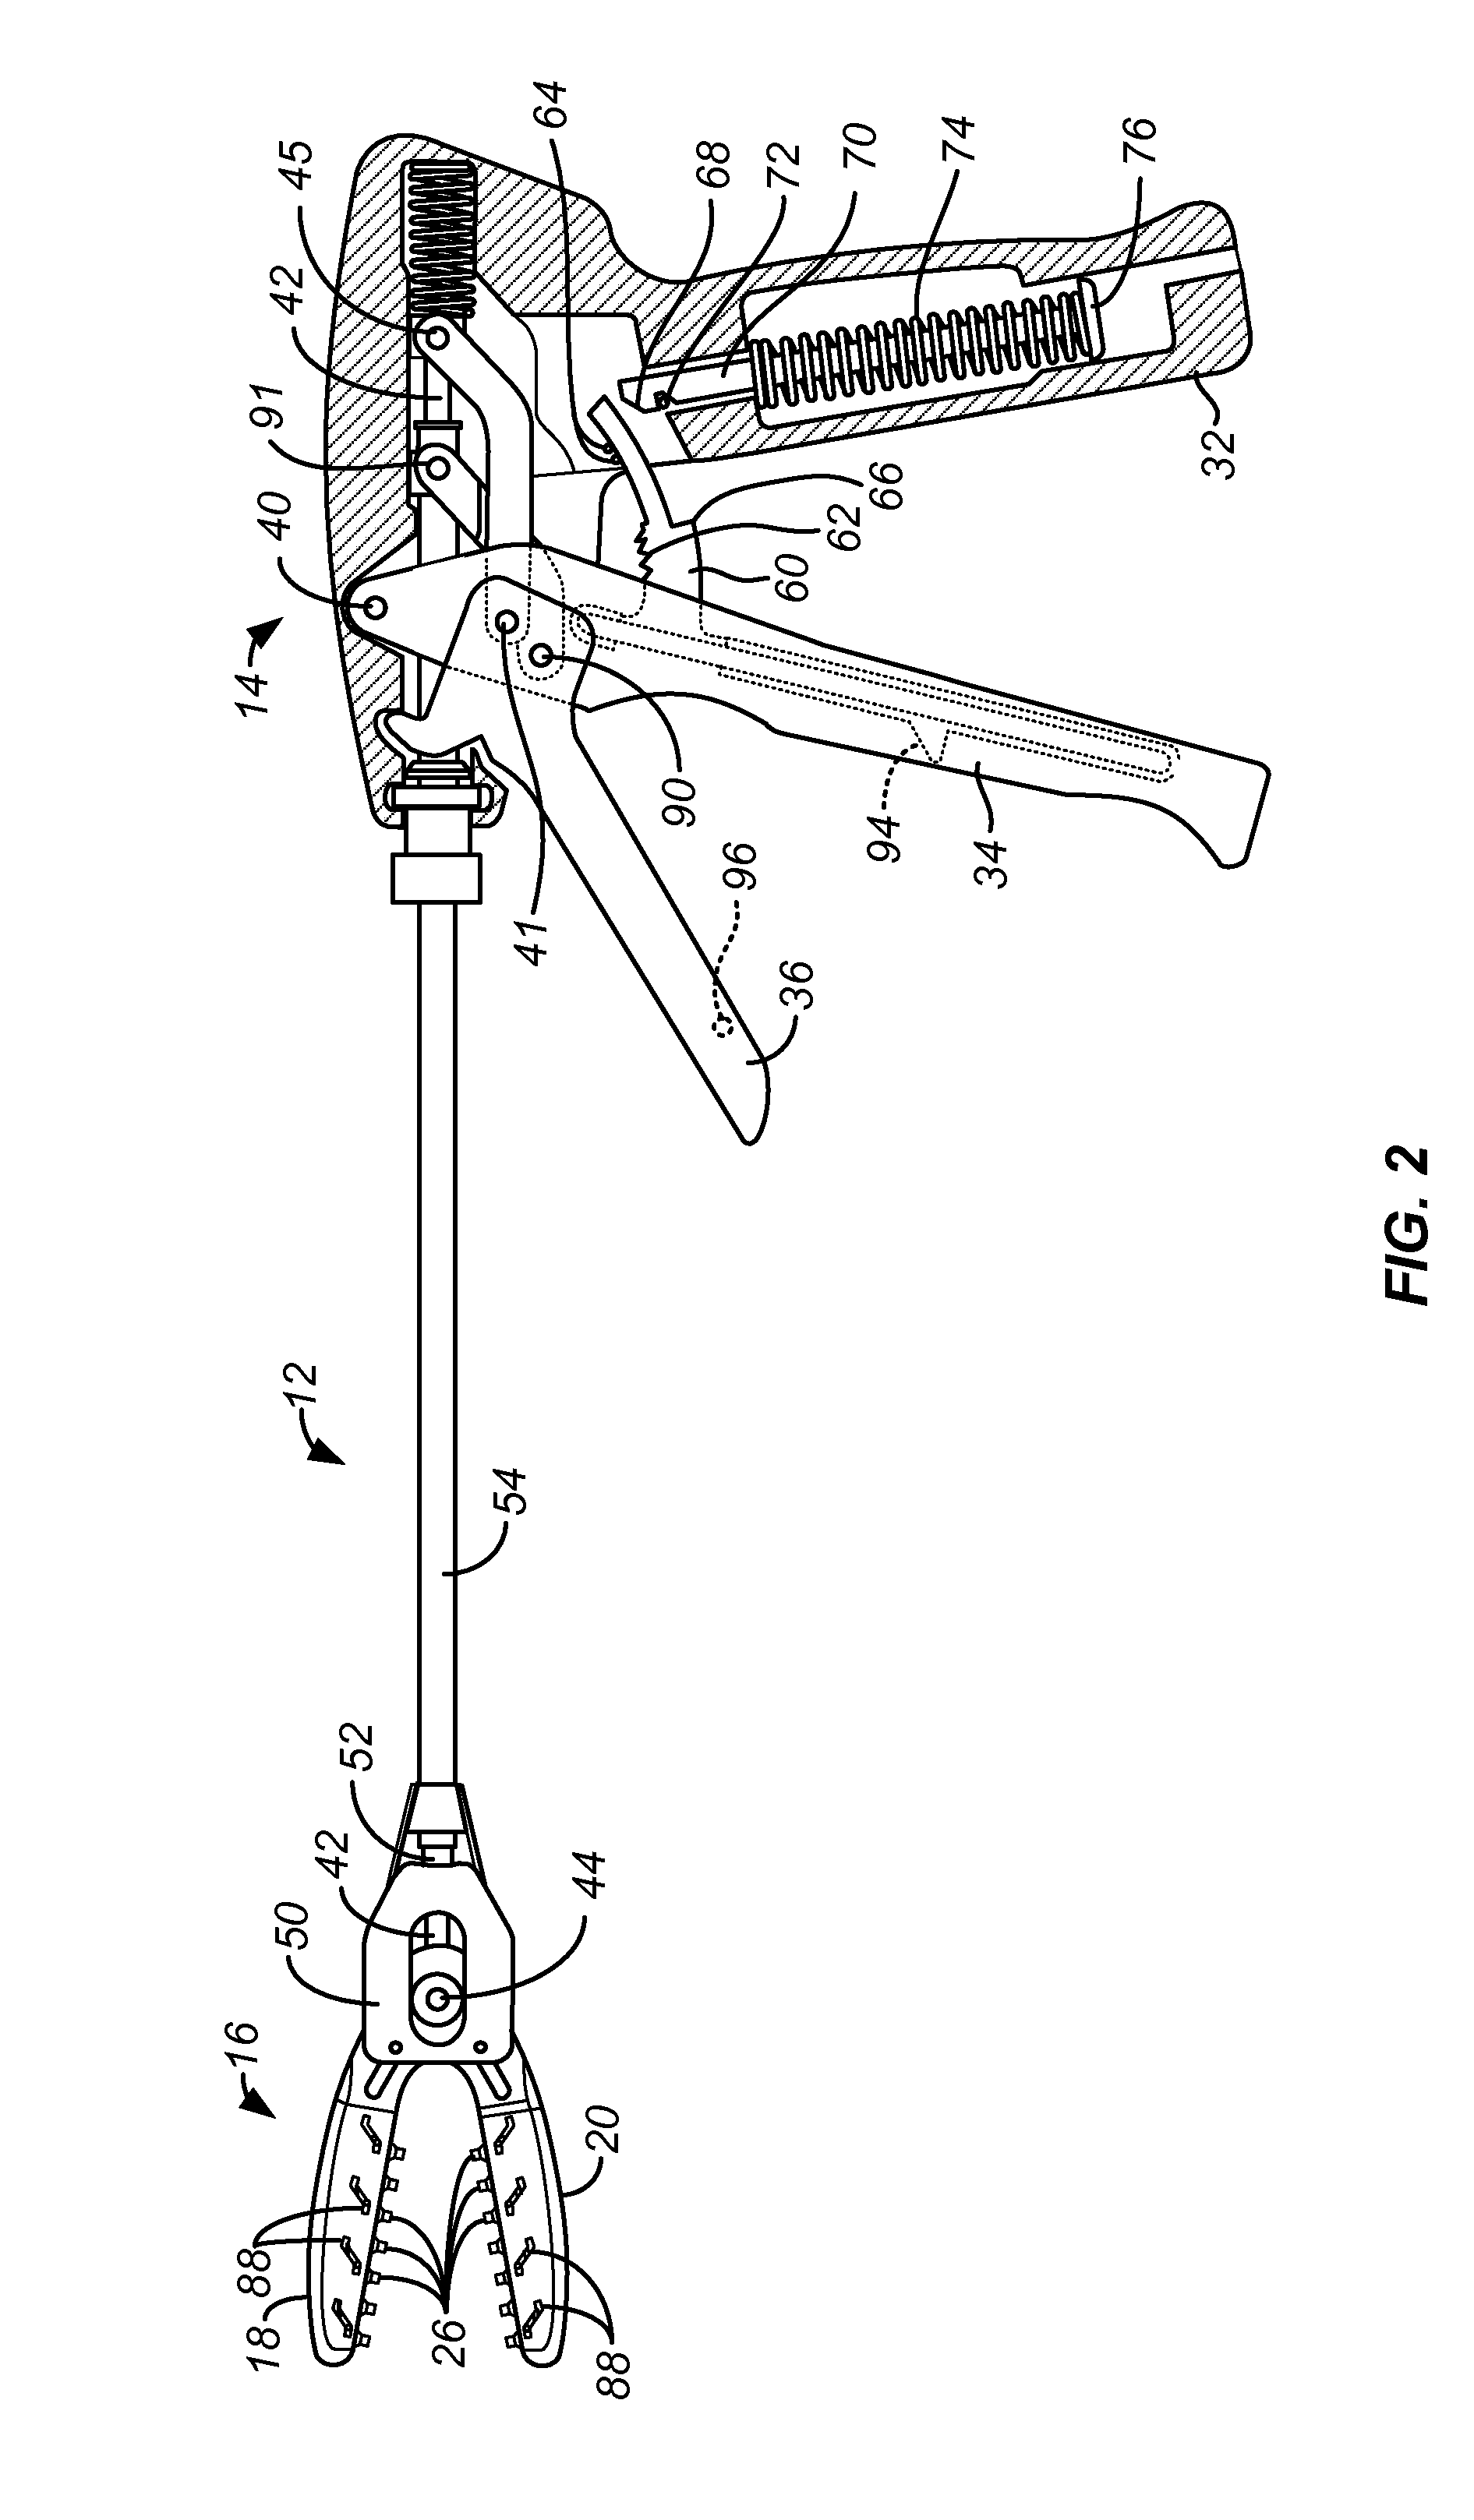 Delivery device and method for compliant tissue fasteners